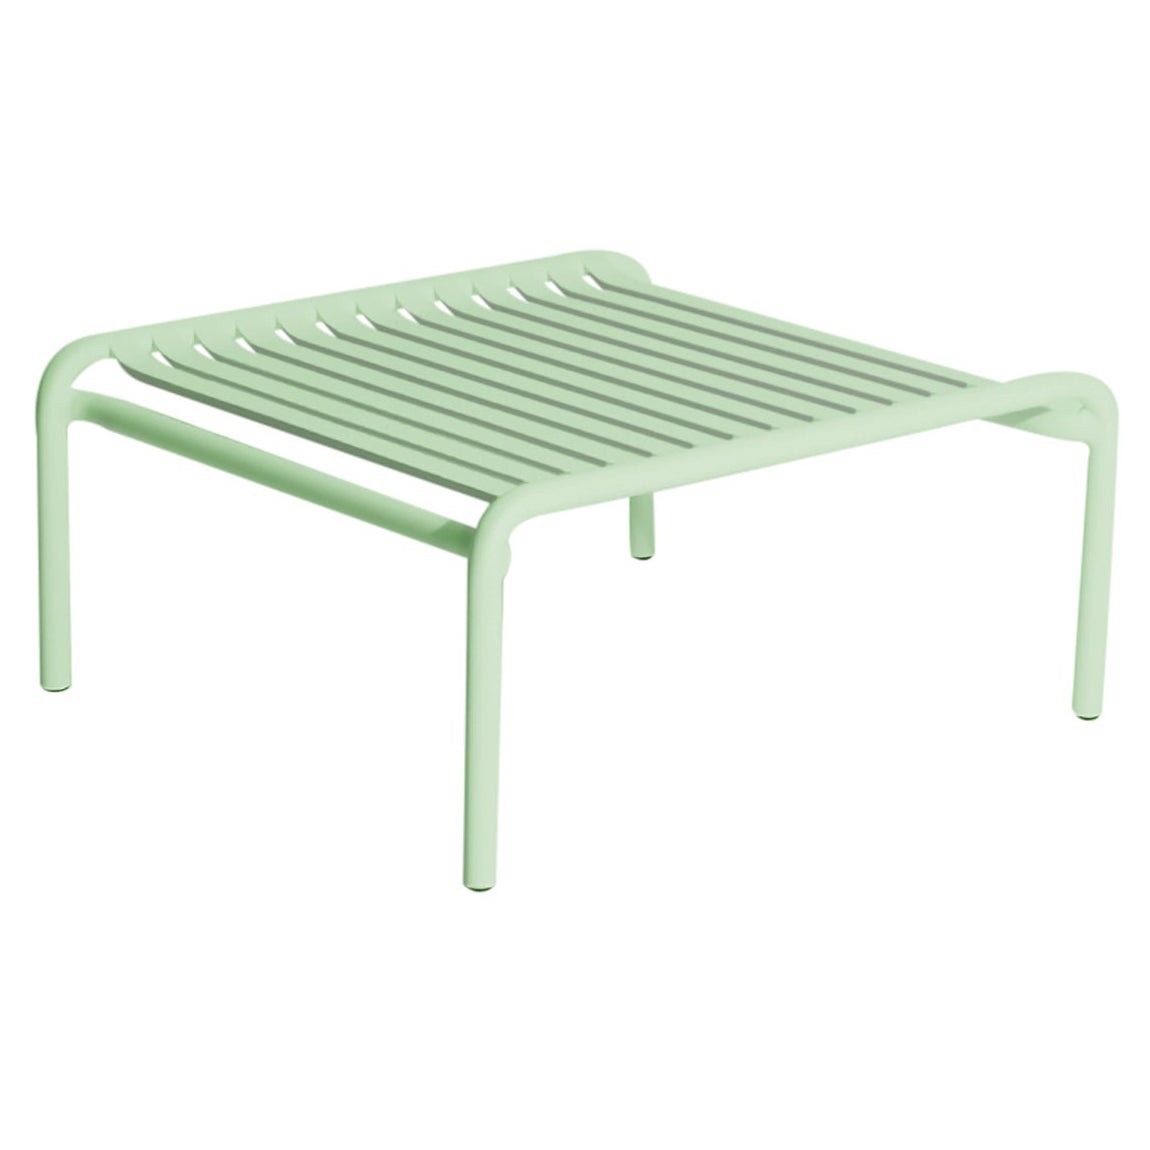 Petite Friture Week-End Coffee Table in Pastel Green Aluminium, 2017 For Sale